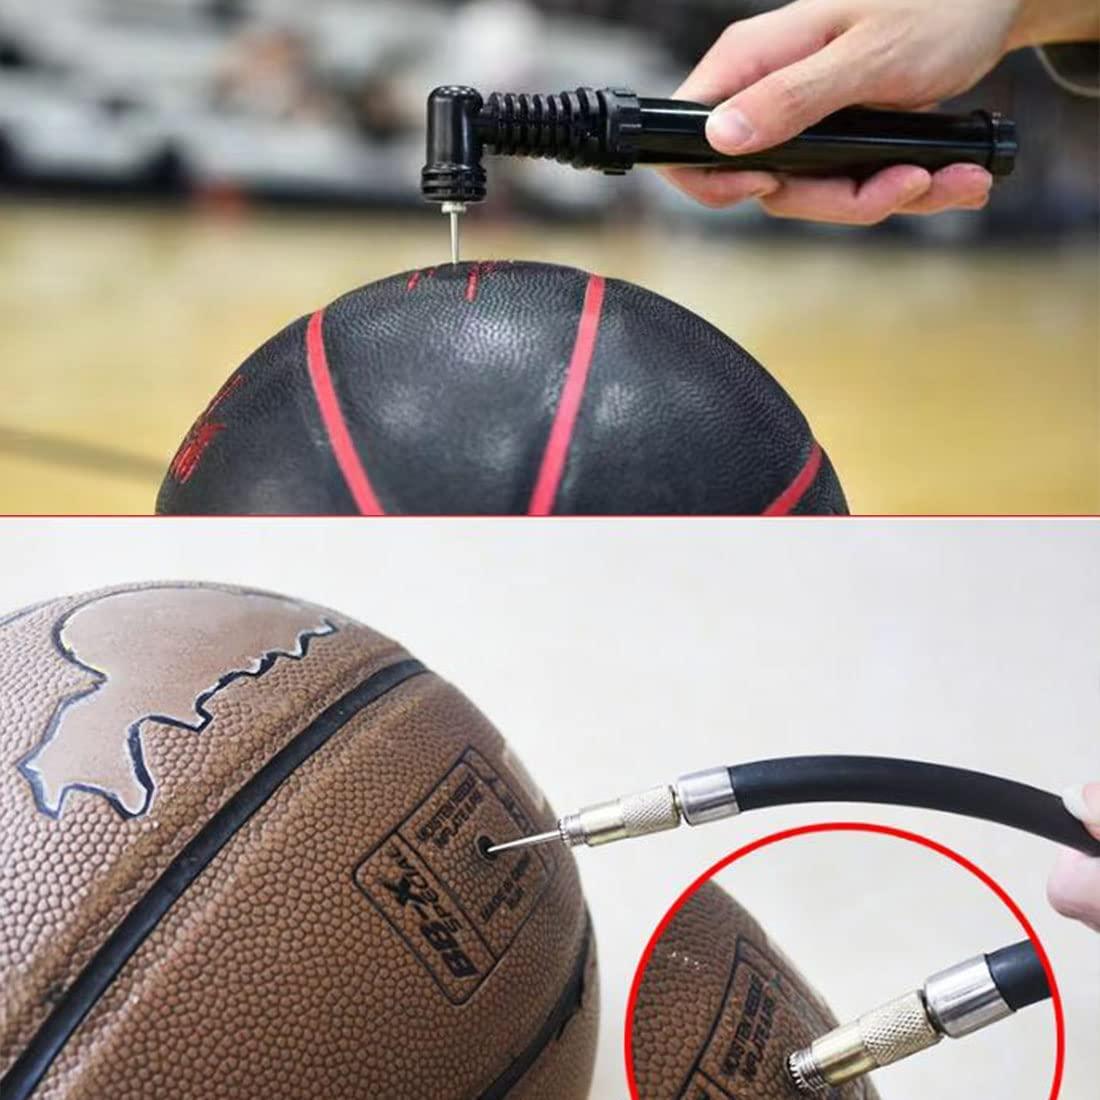 Ball Inflating Needle on Sale with Low Price Match Promise